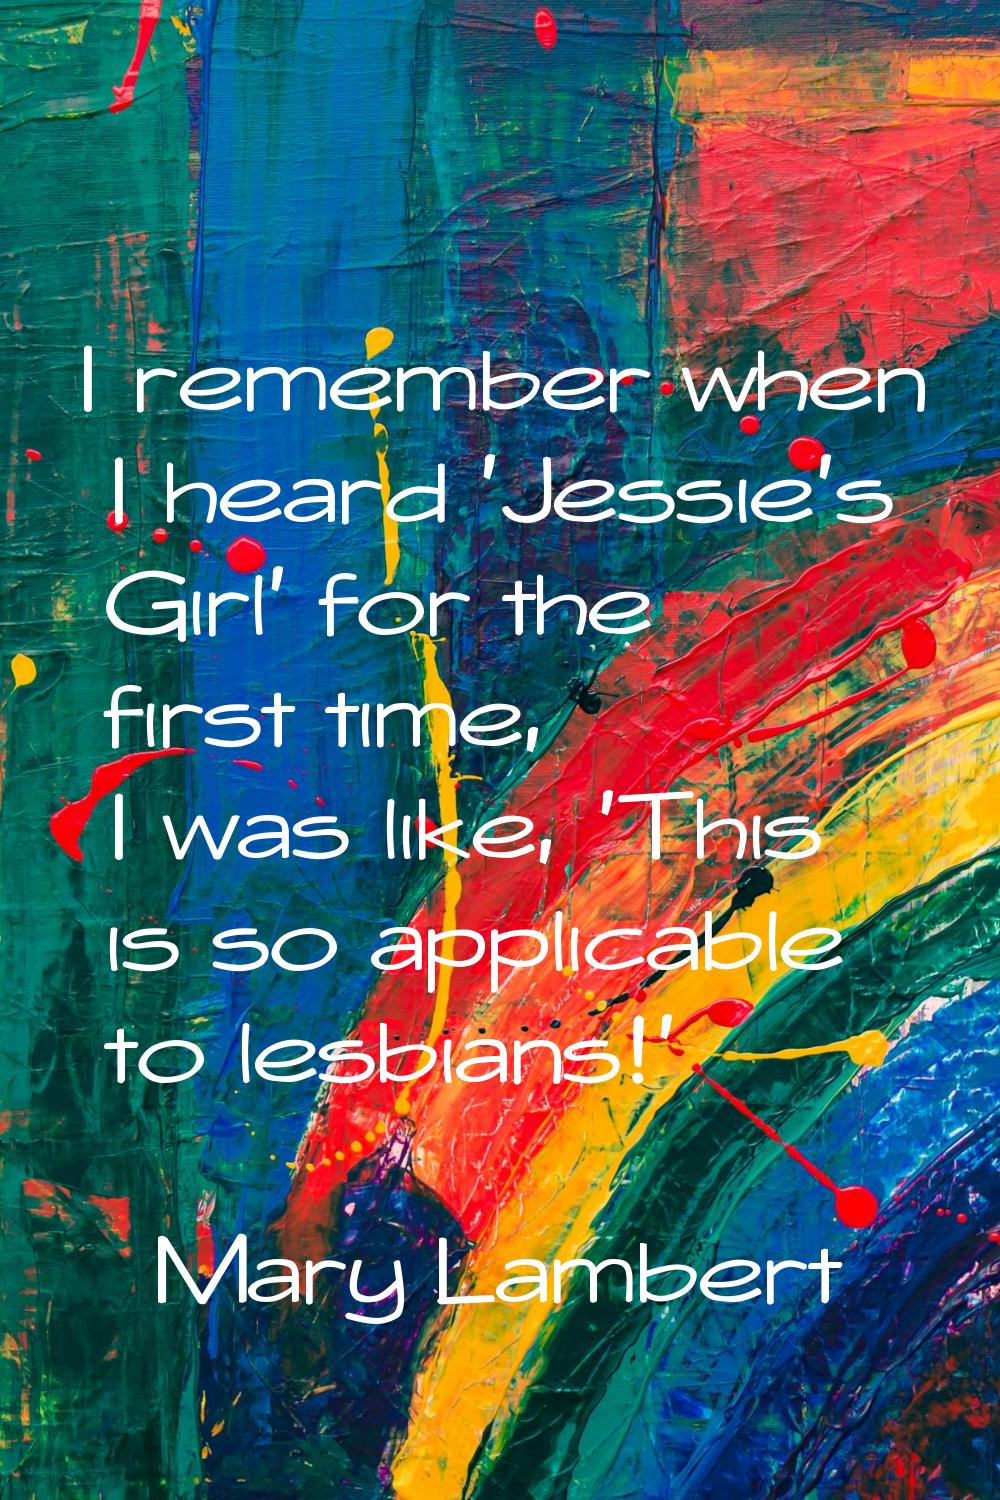 I remember when I heard 'Jessie's Girl' for the first time, I was like, 'This is so applicable to l